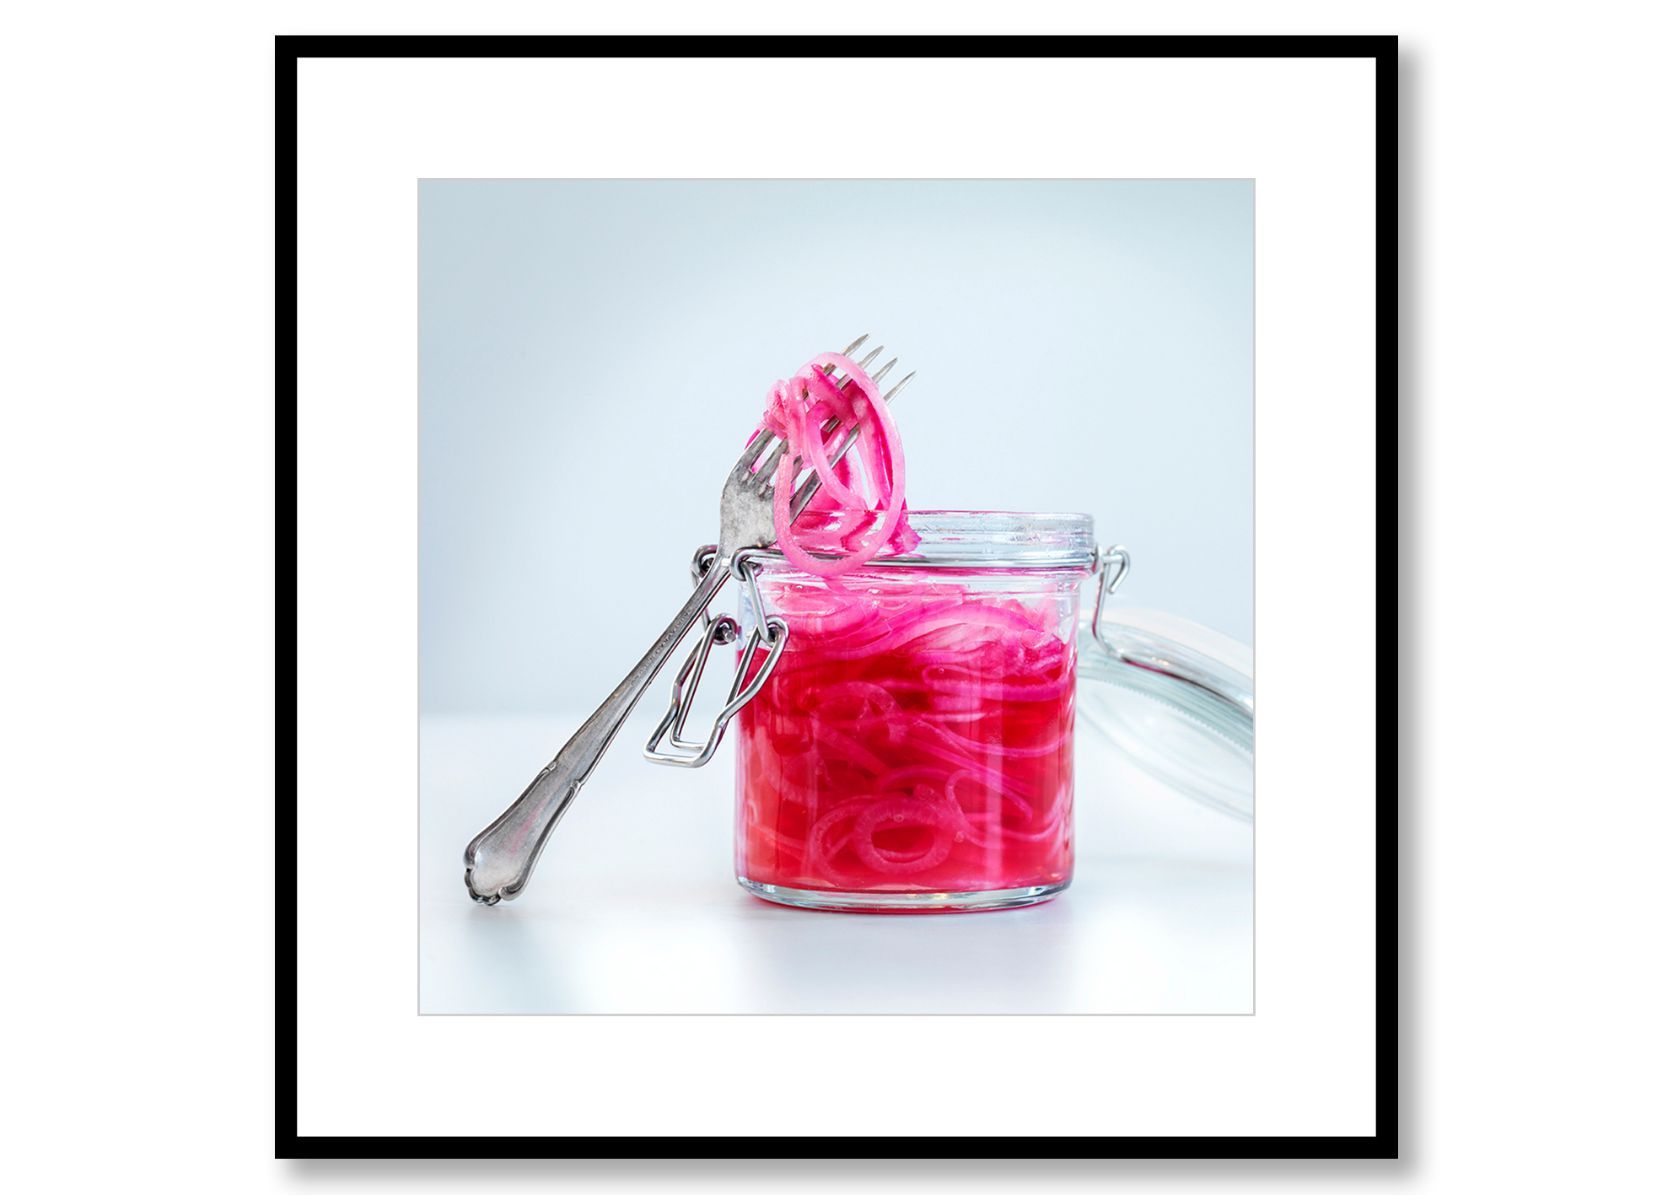 Pickled red onions. Food Art. Prints for sale. Photo by Fredrik Rege